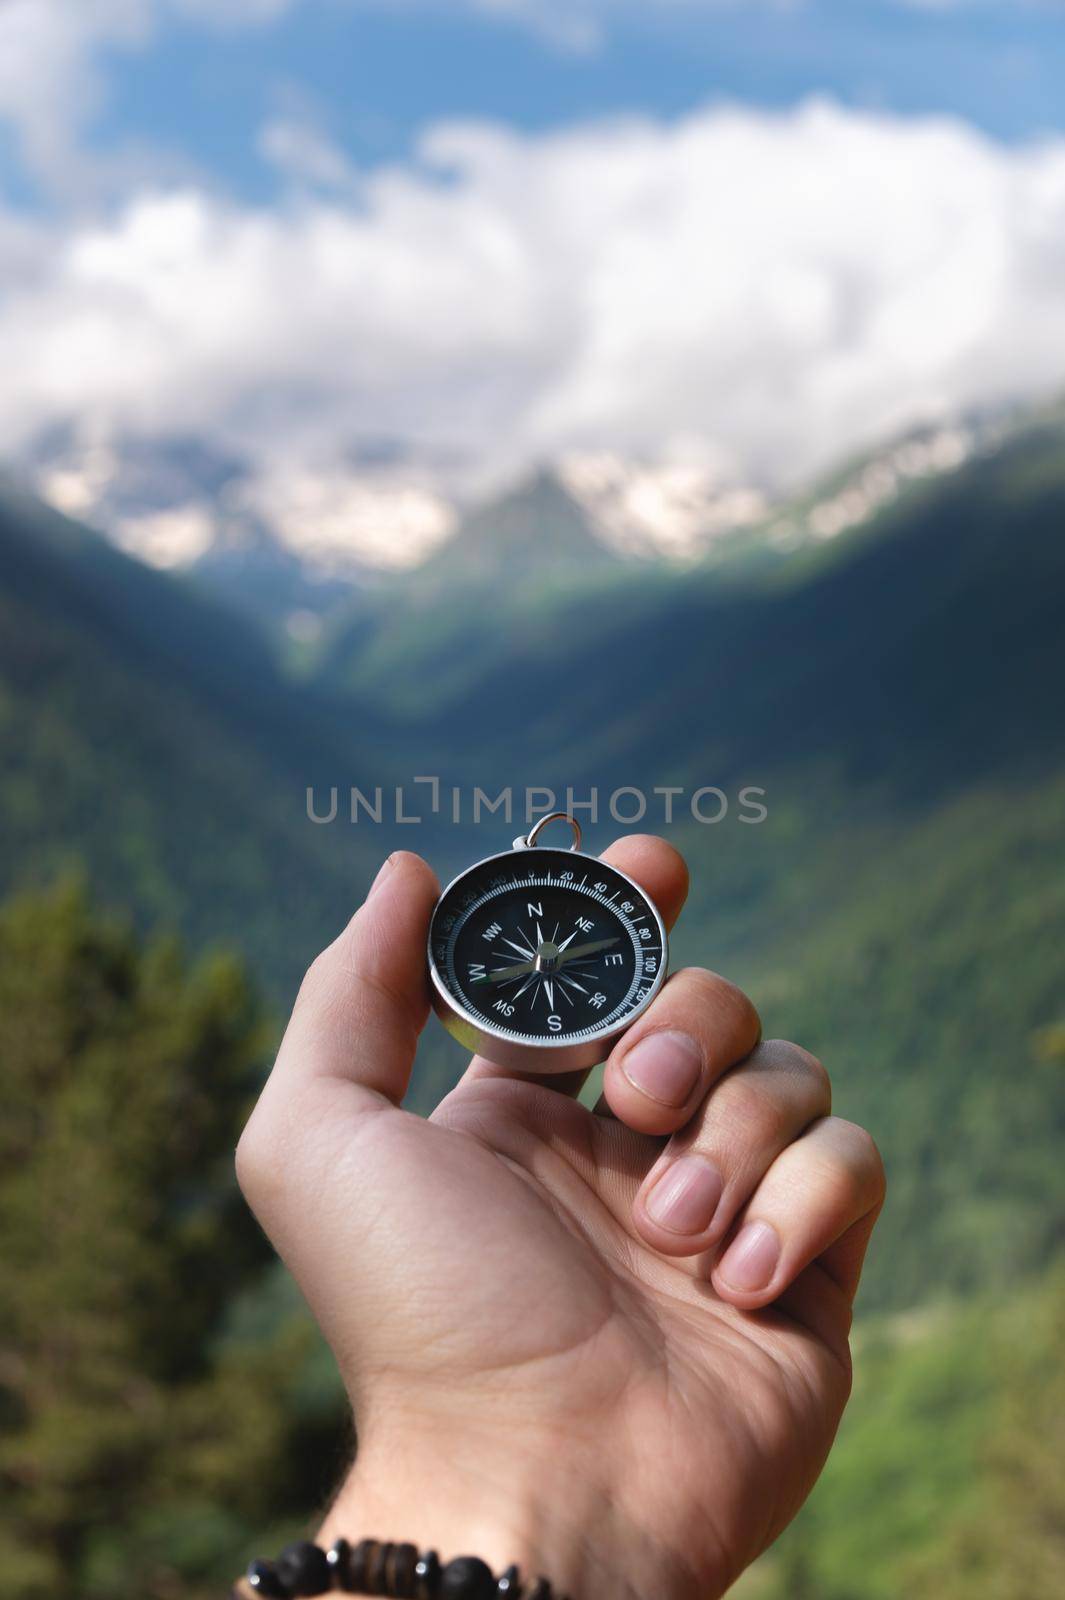 A hand with a compass against the backdrop of epic snow-capped mountains with clouds and a forest at the foot, close-up.